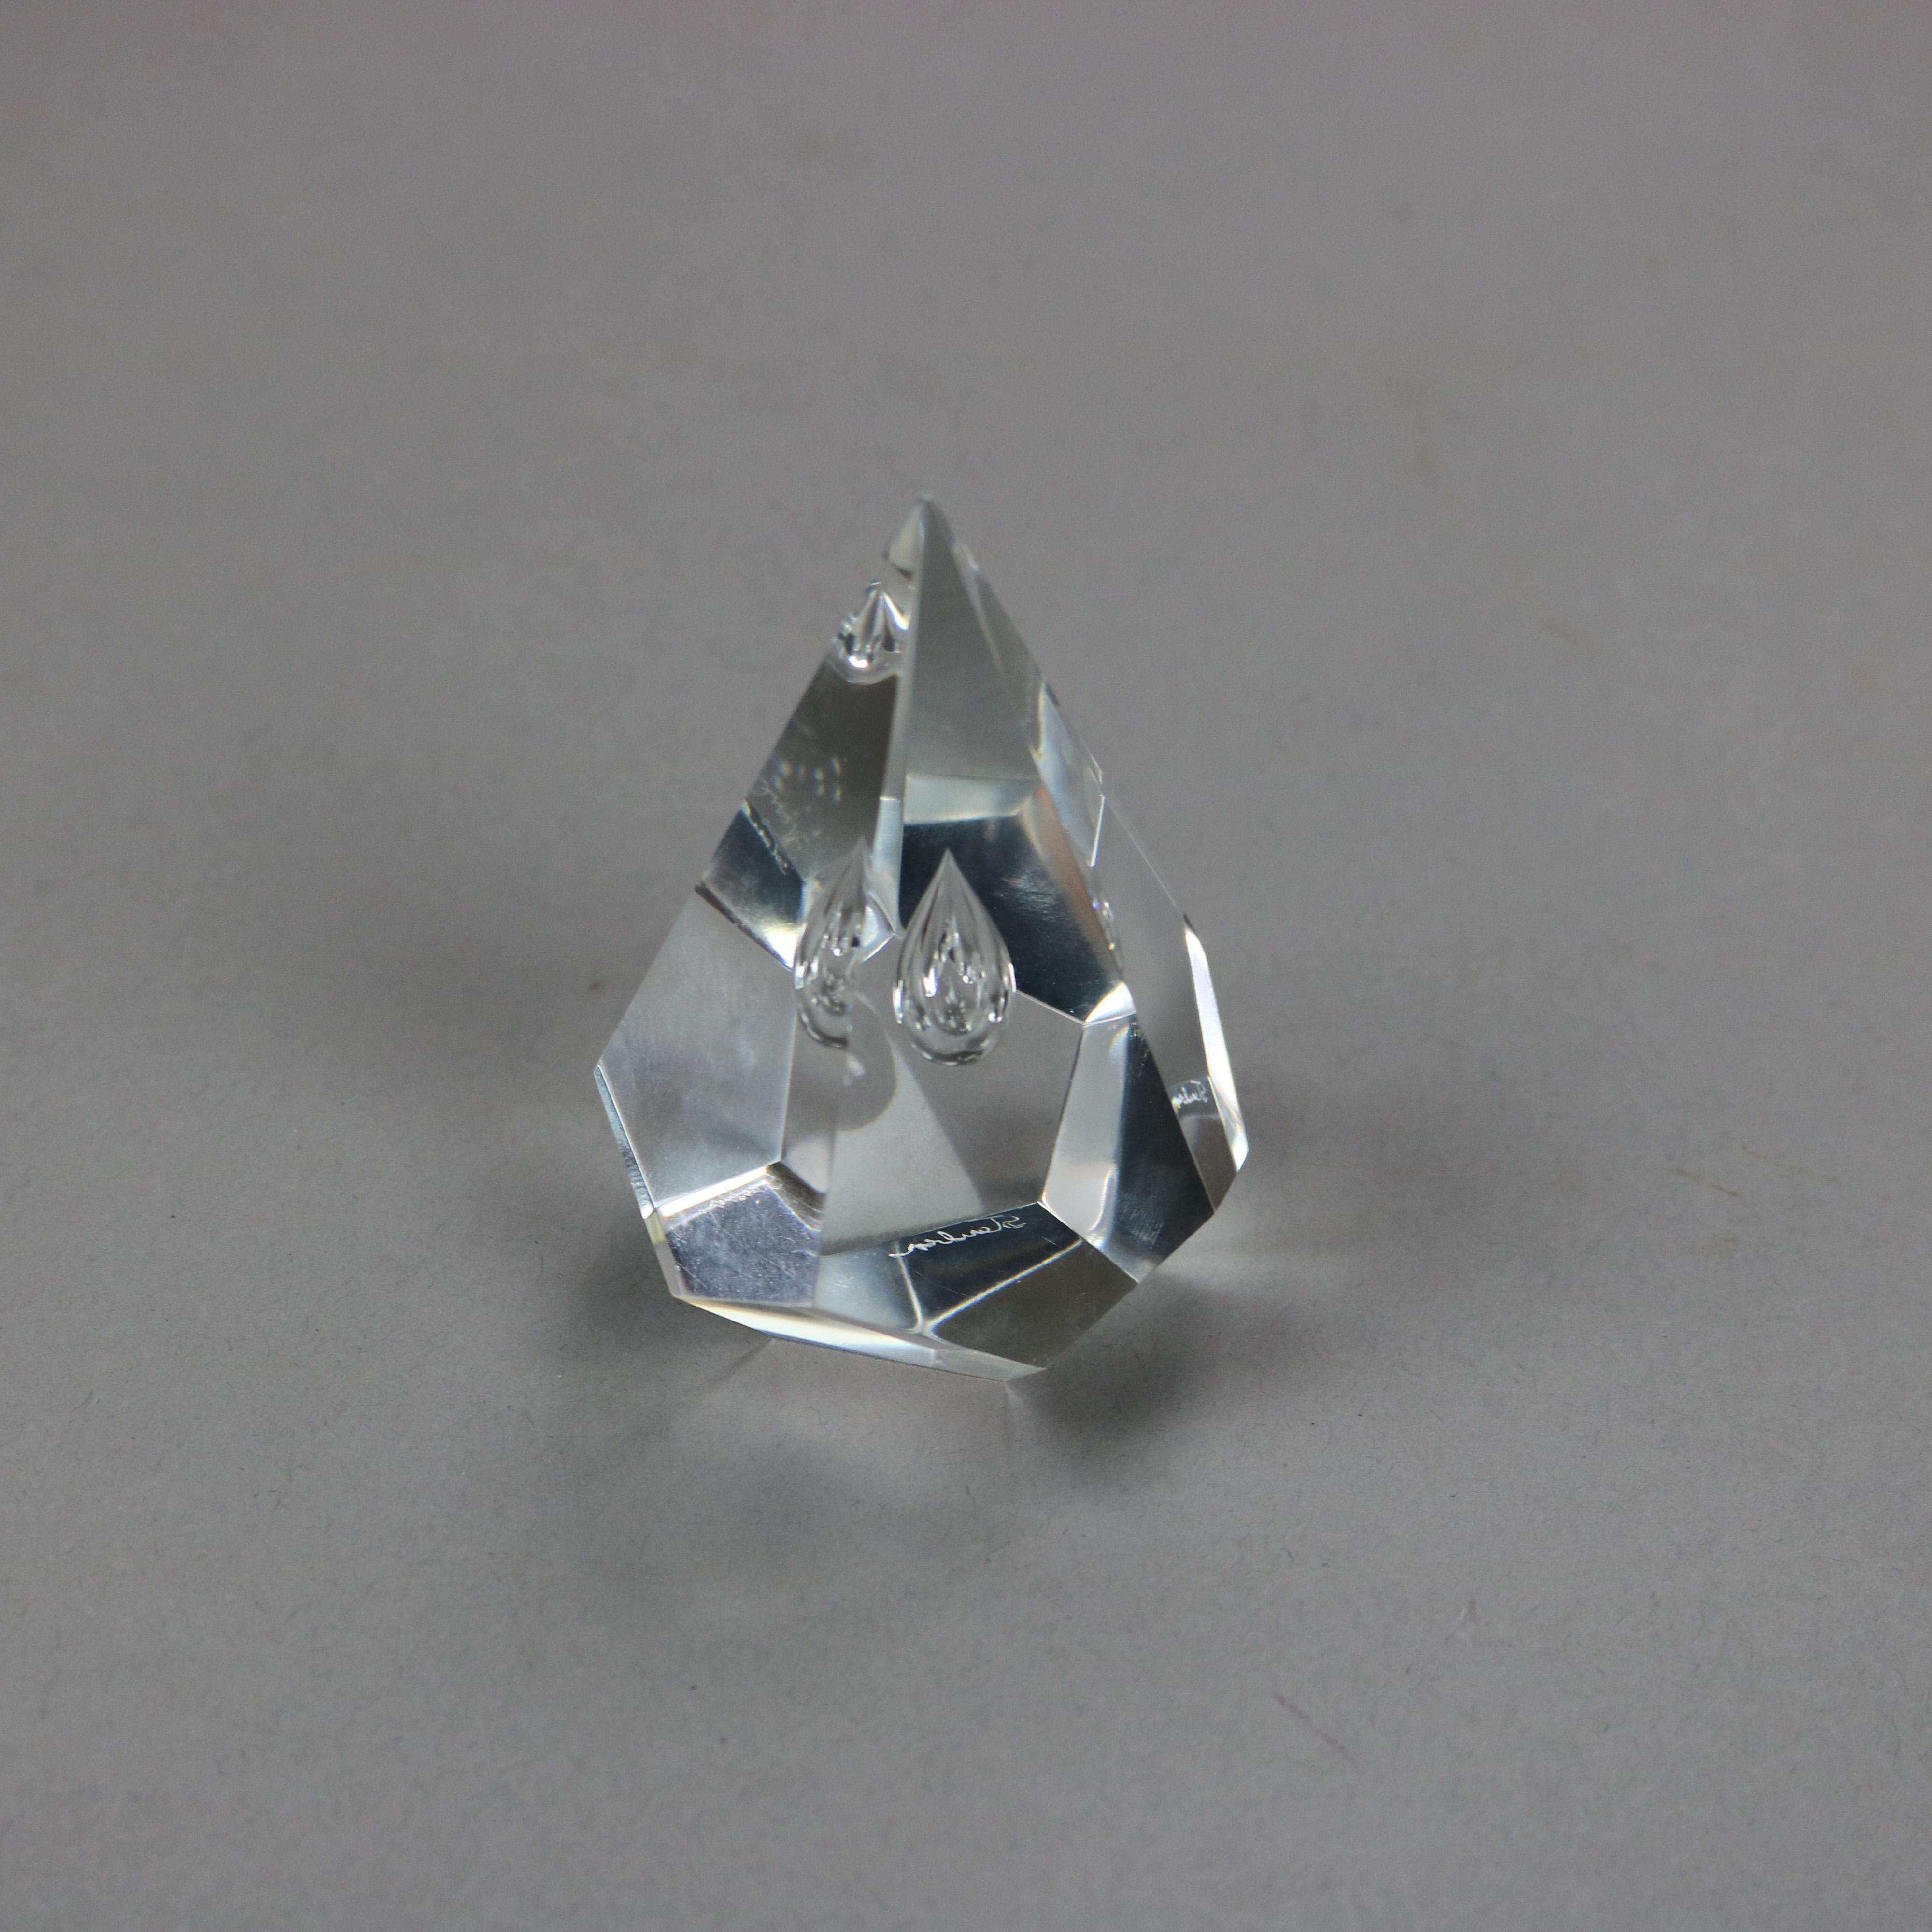 Steuben Glass Pyramid Paperweight, Signed, 20th C 12